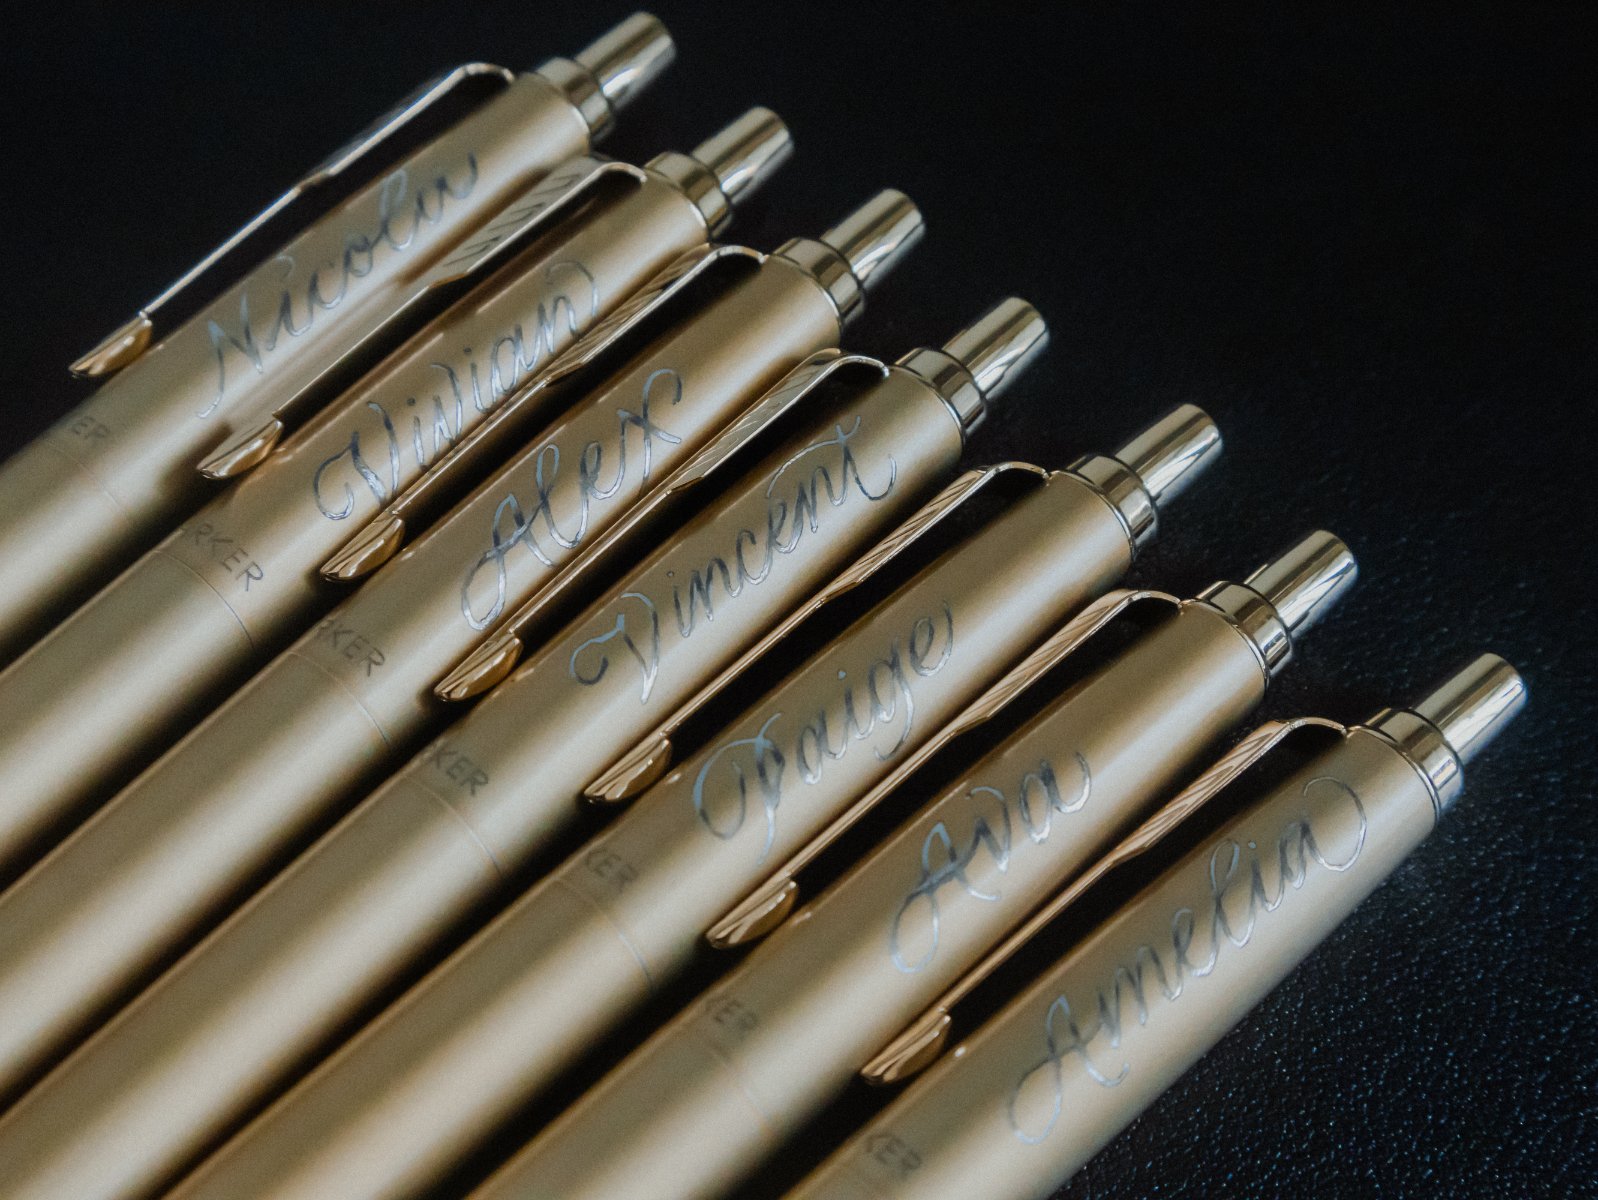 First Name Calligraphy Engraving on Parker Pens for Bloomberg 17.jpg